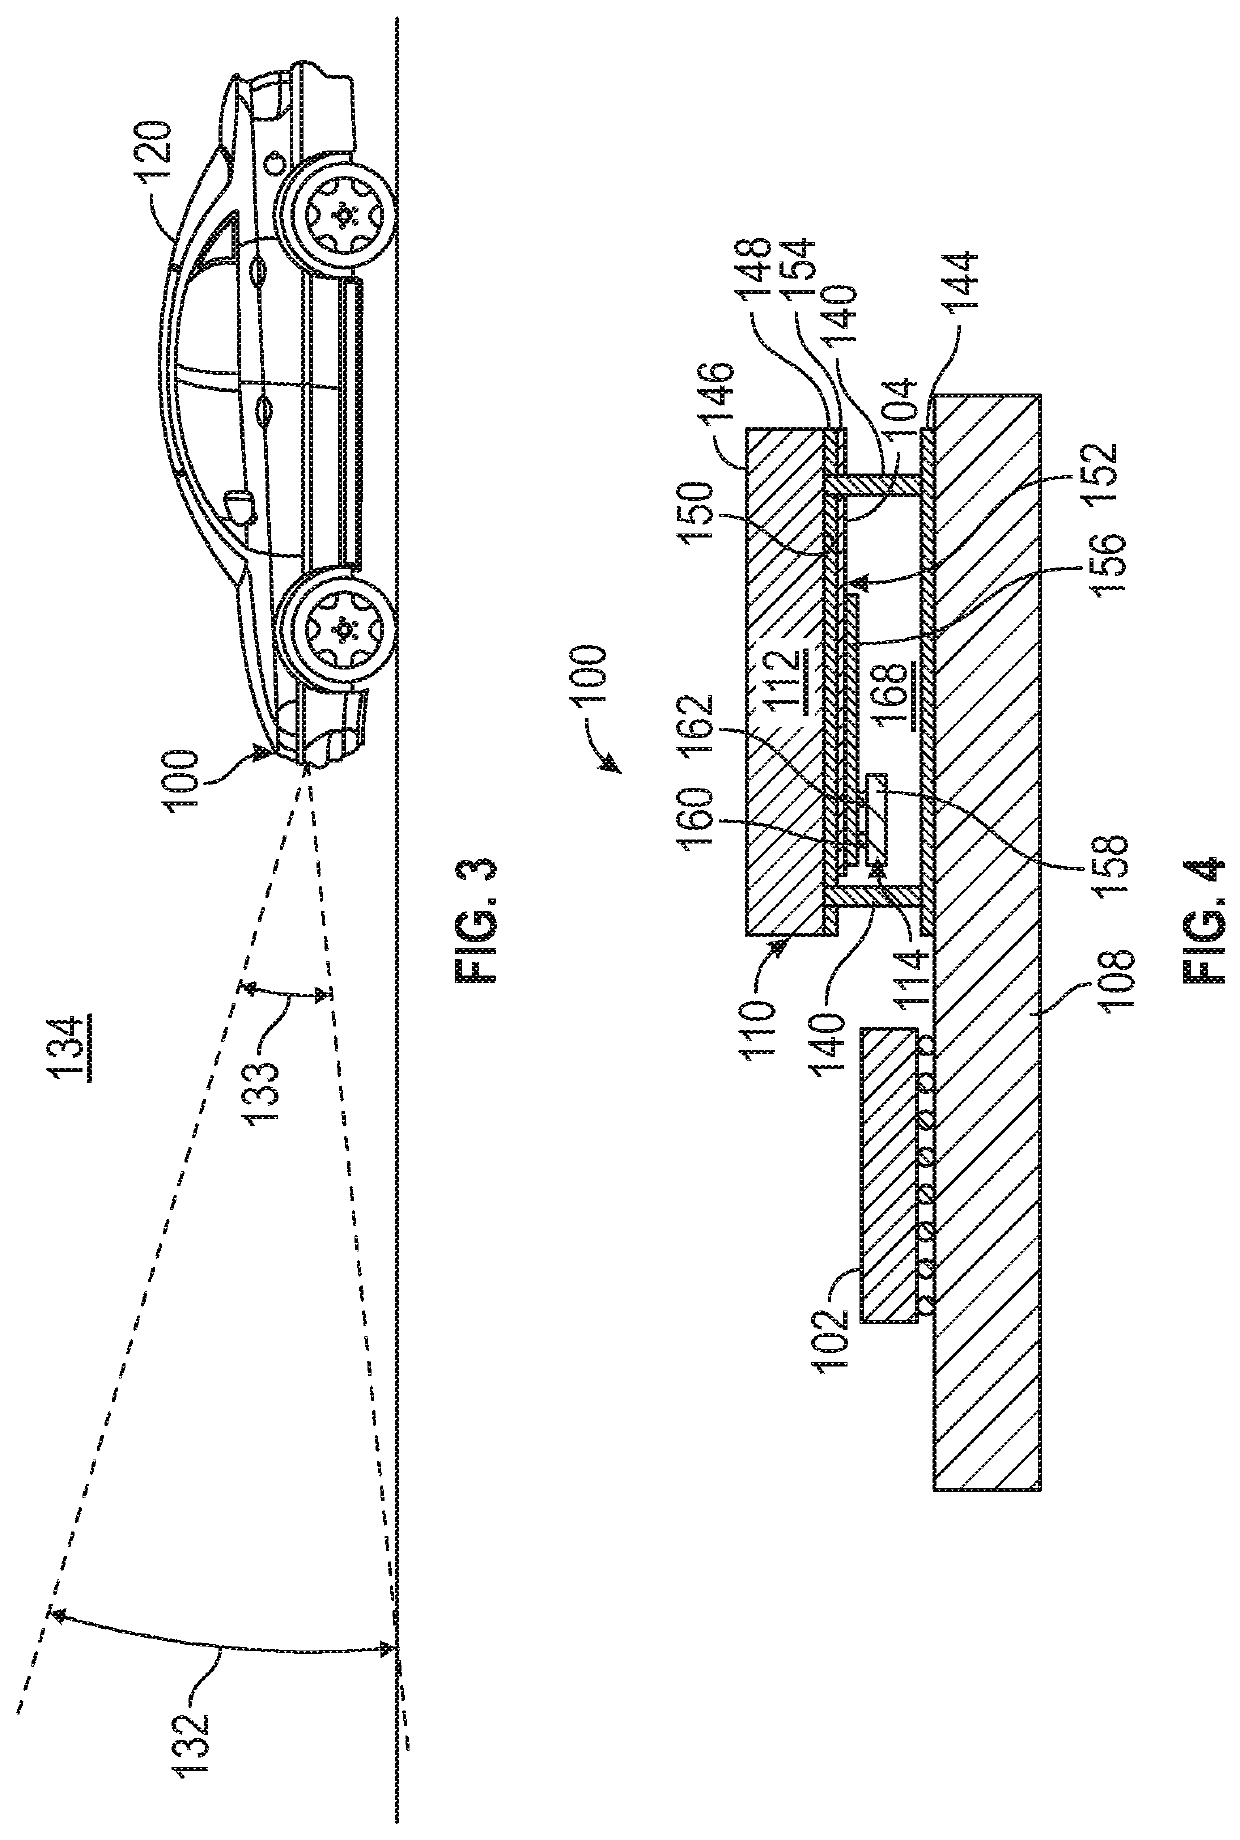 Inverted microstrip travelling wave patch array antenna system